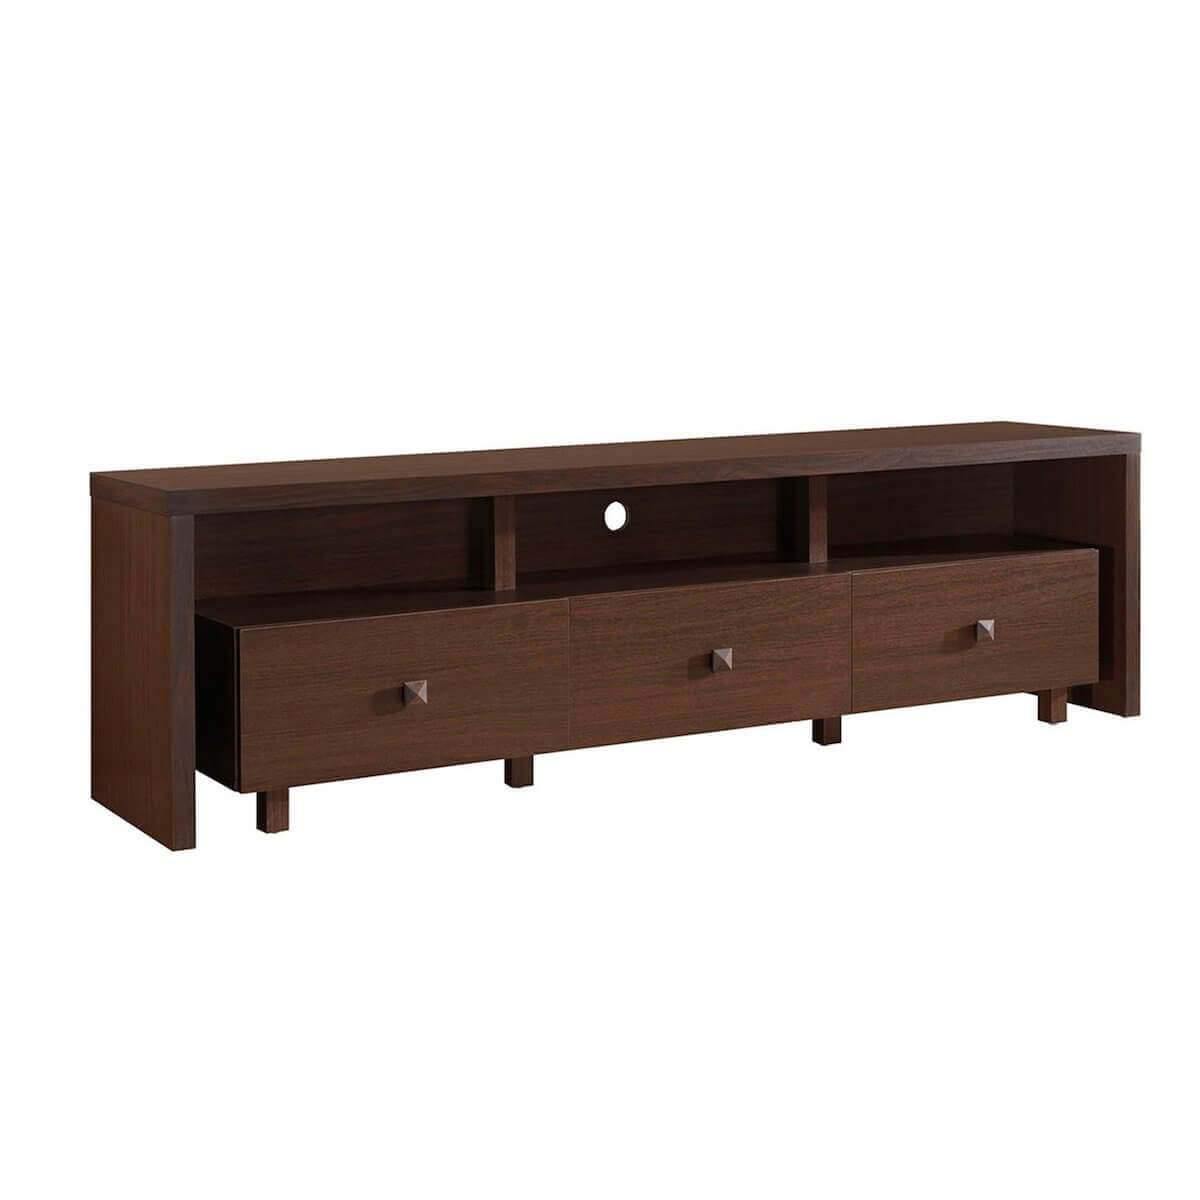 Techni Mobili Hickory Elegant TV Stand for TV's Up To 75" with Storage RTA-8895-HRY